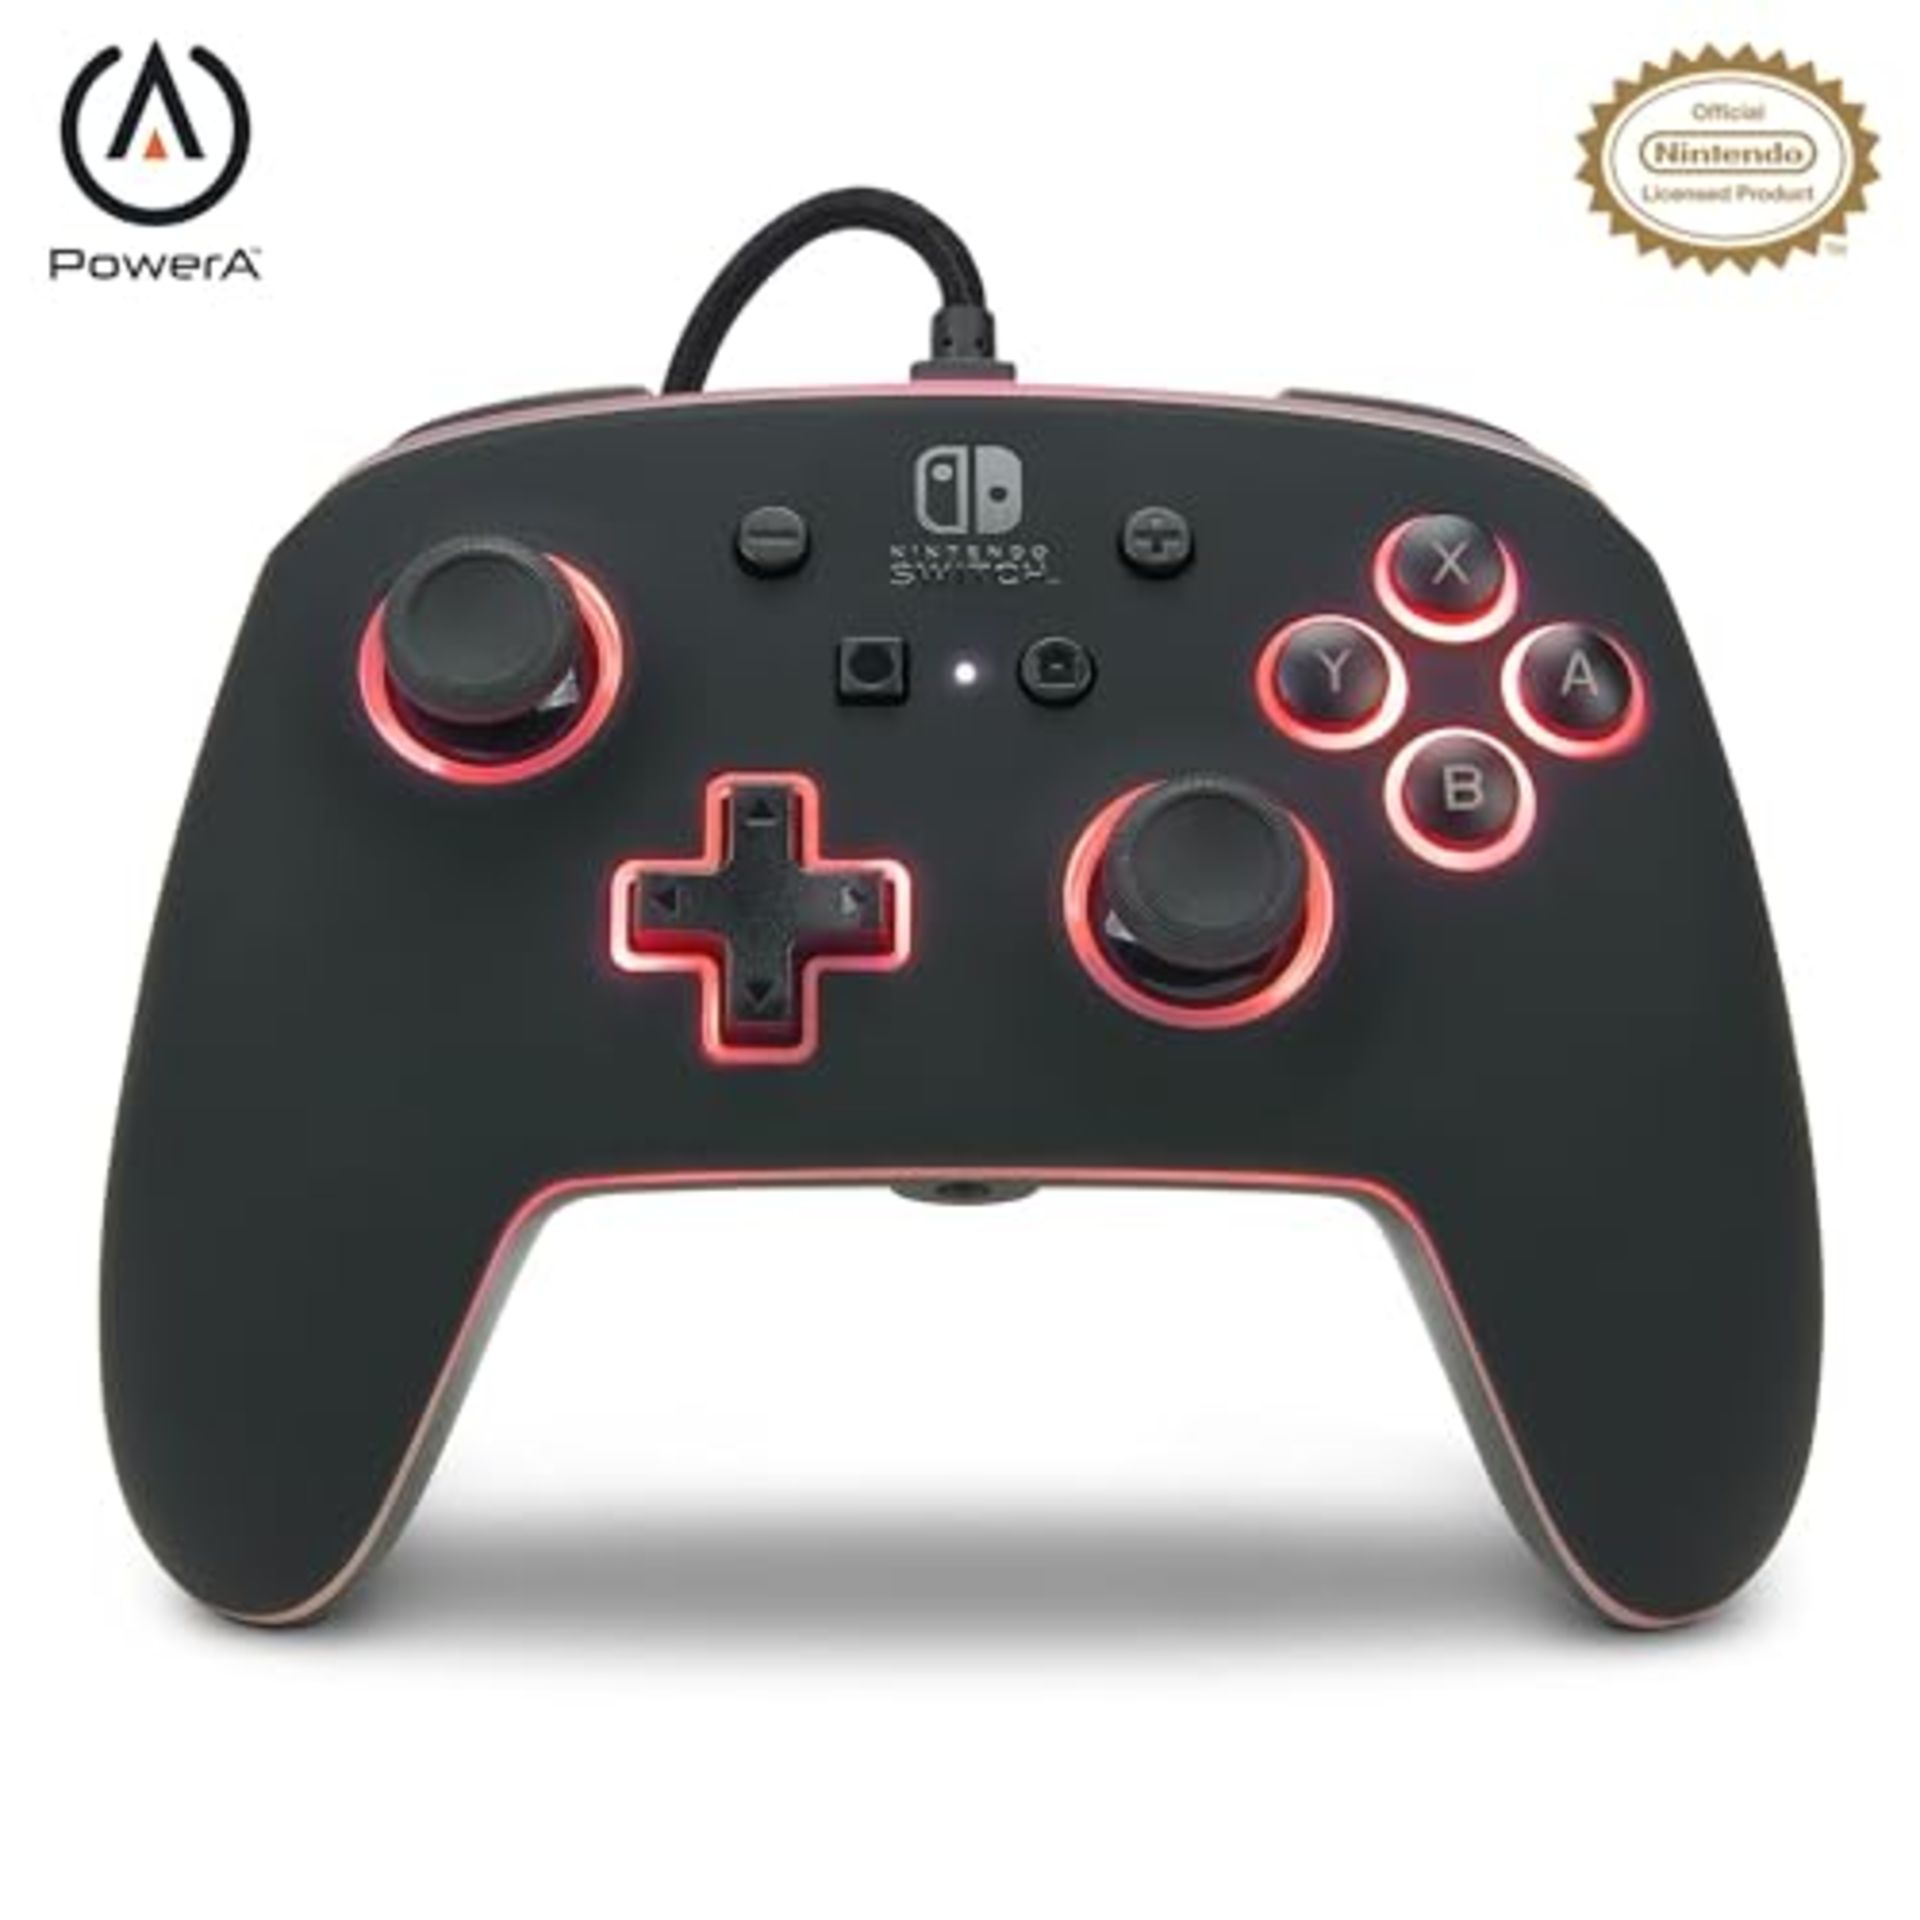 PowerA Advanced Wired Controller Spectra for Nintendo Switch - Nintendo Switch - Image 4 of 6